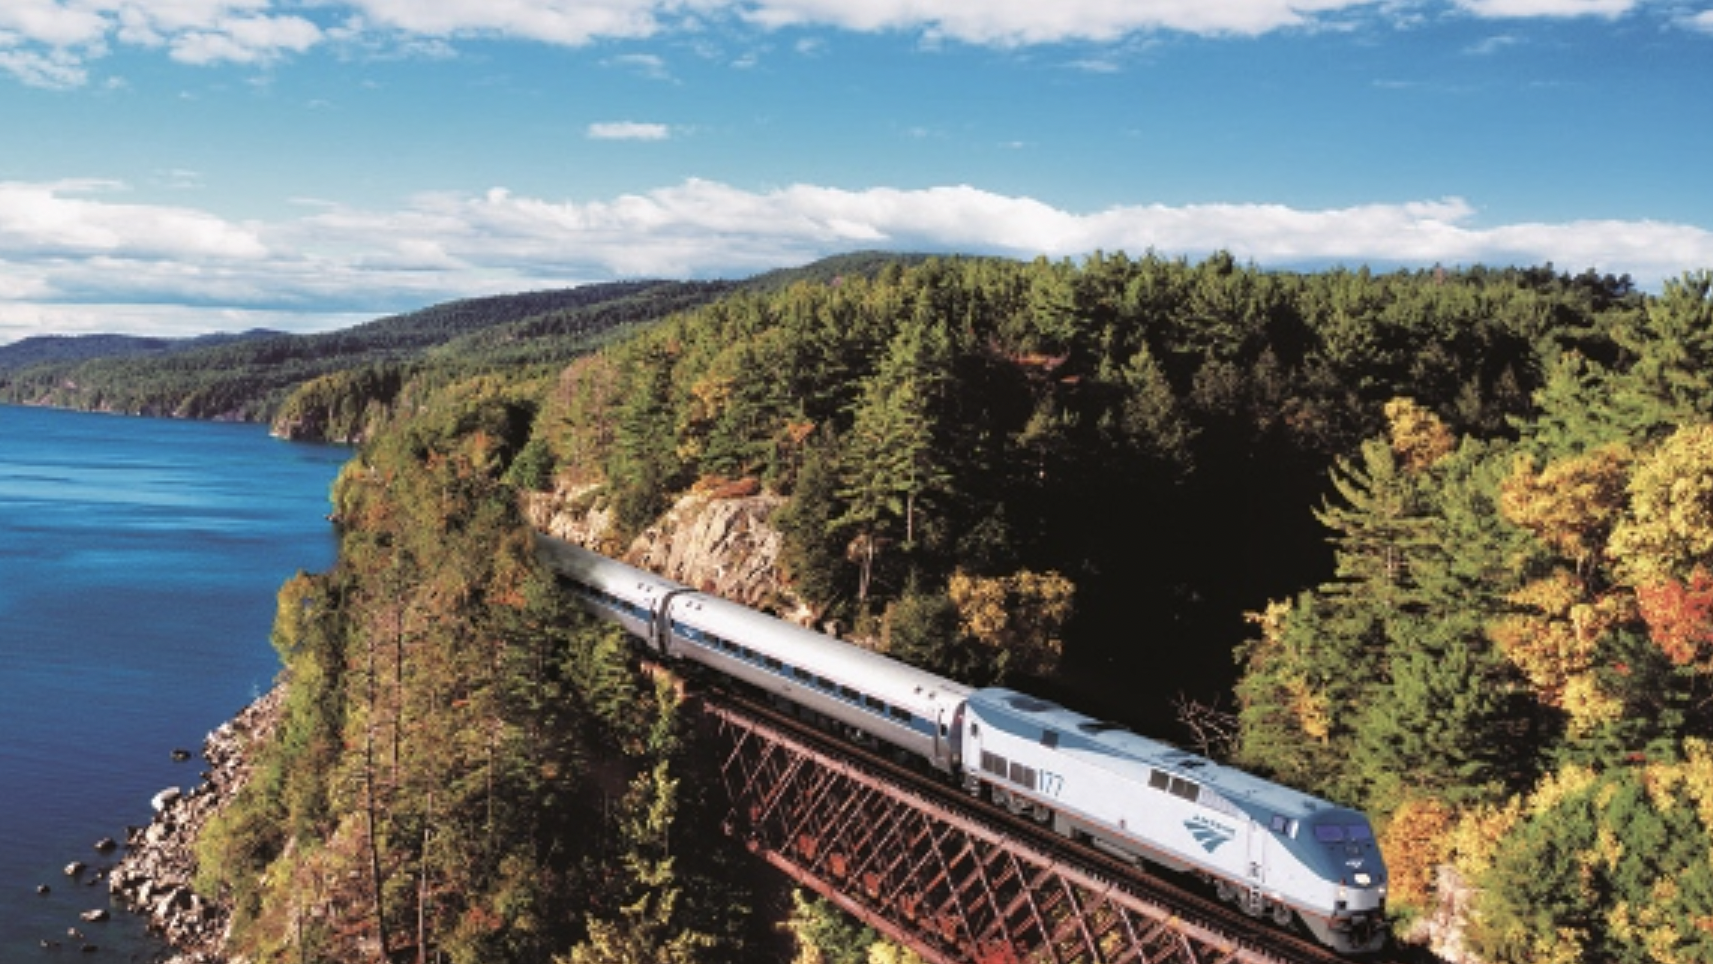 Amtrak’s Adirondack service between New York City and Montreal will resume April 3. It had been suspended for three years due to the pandemic.